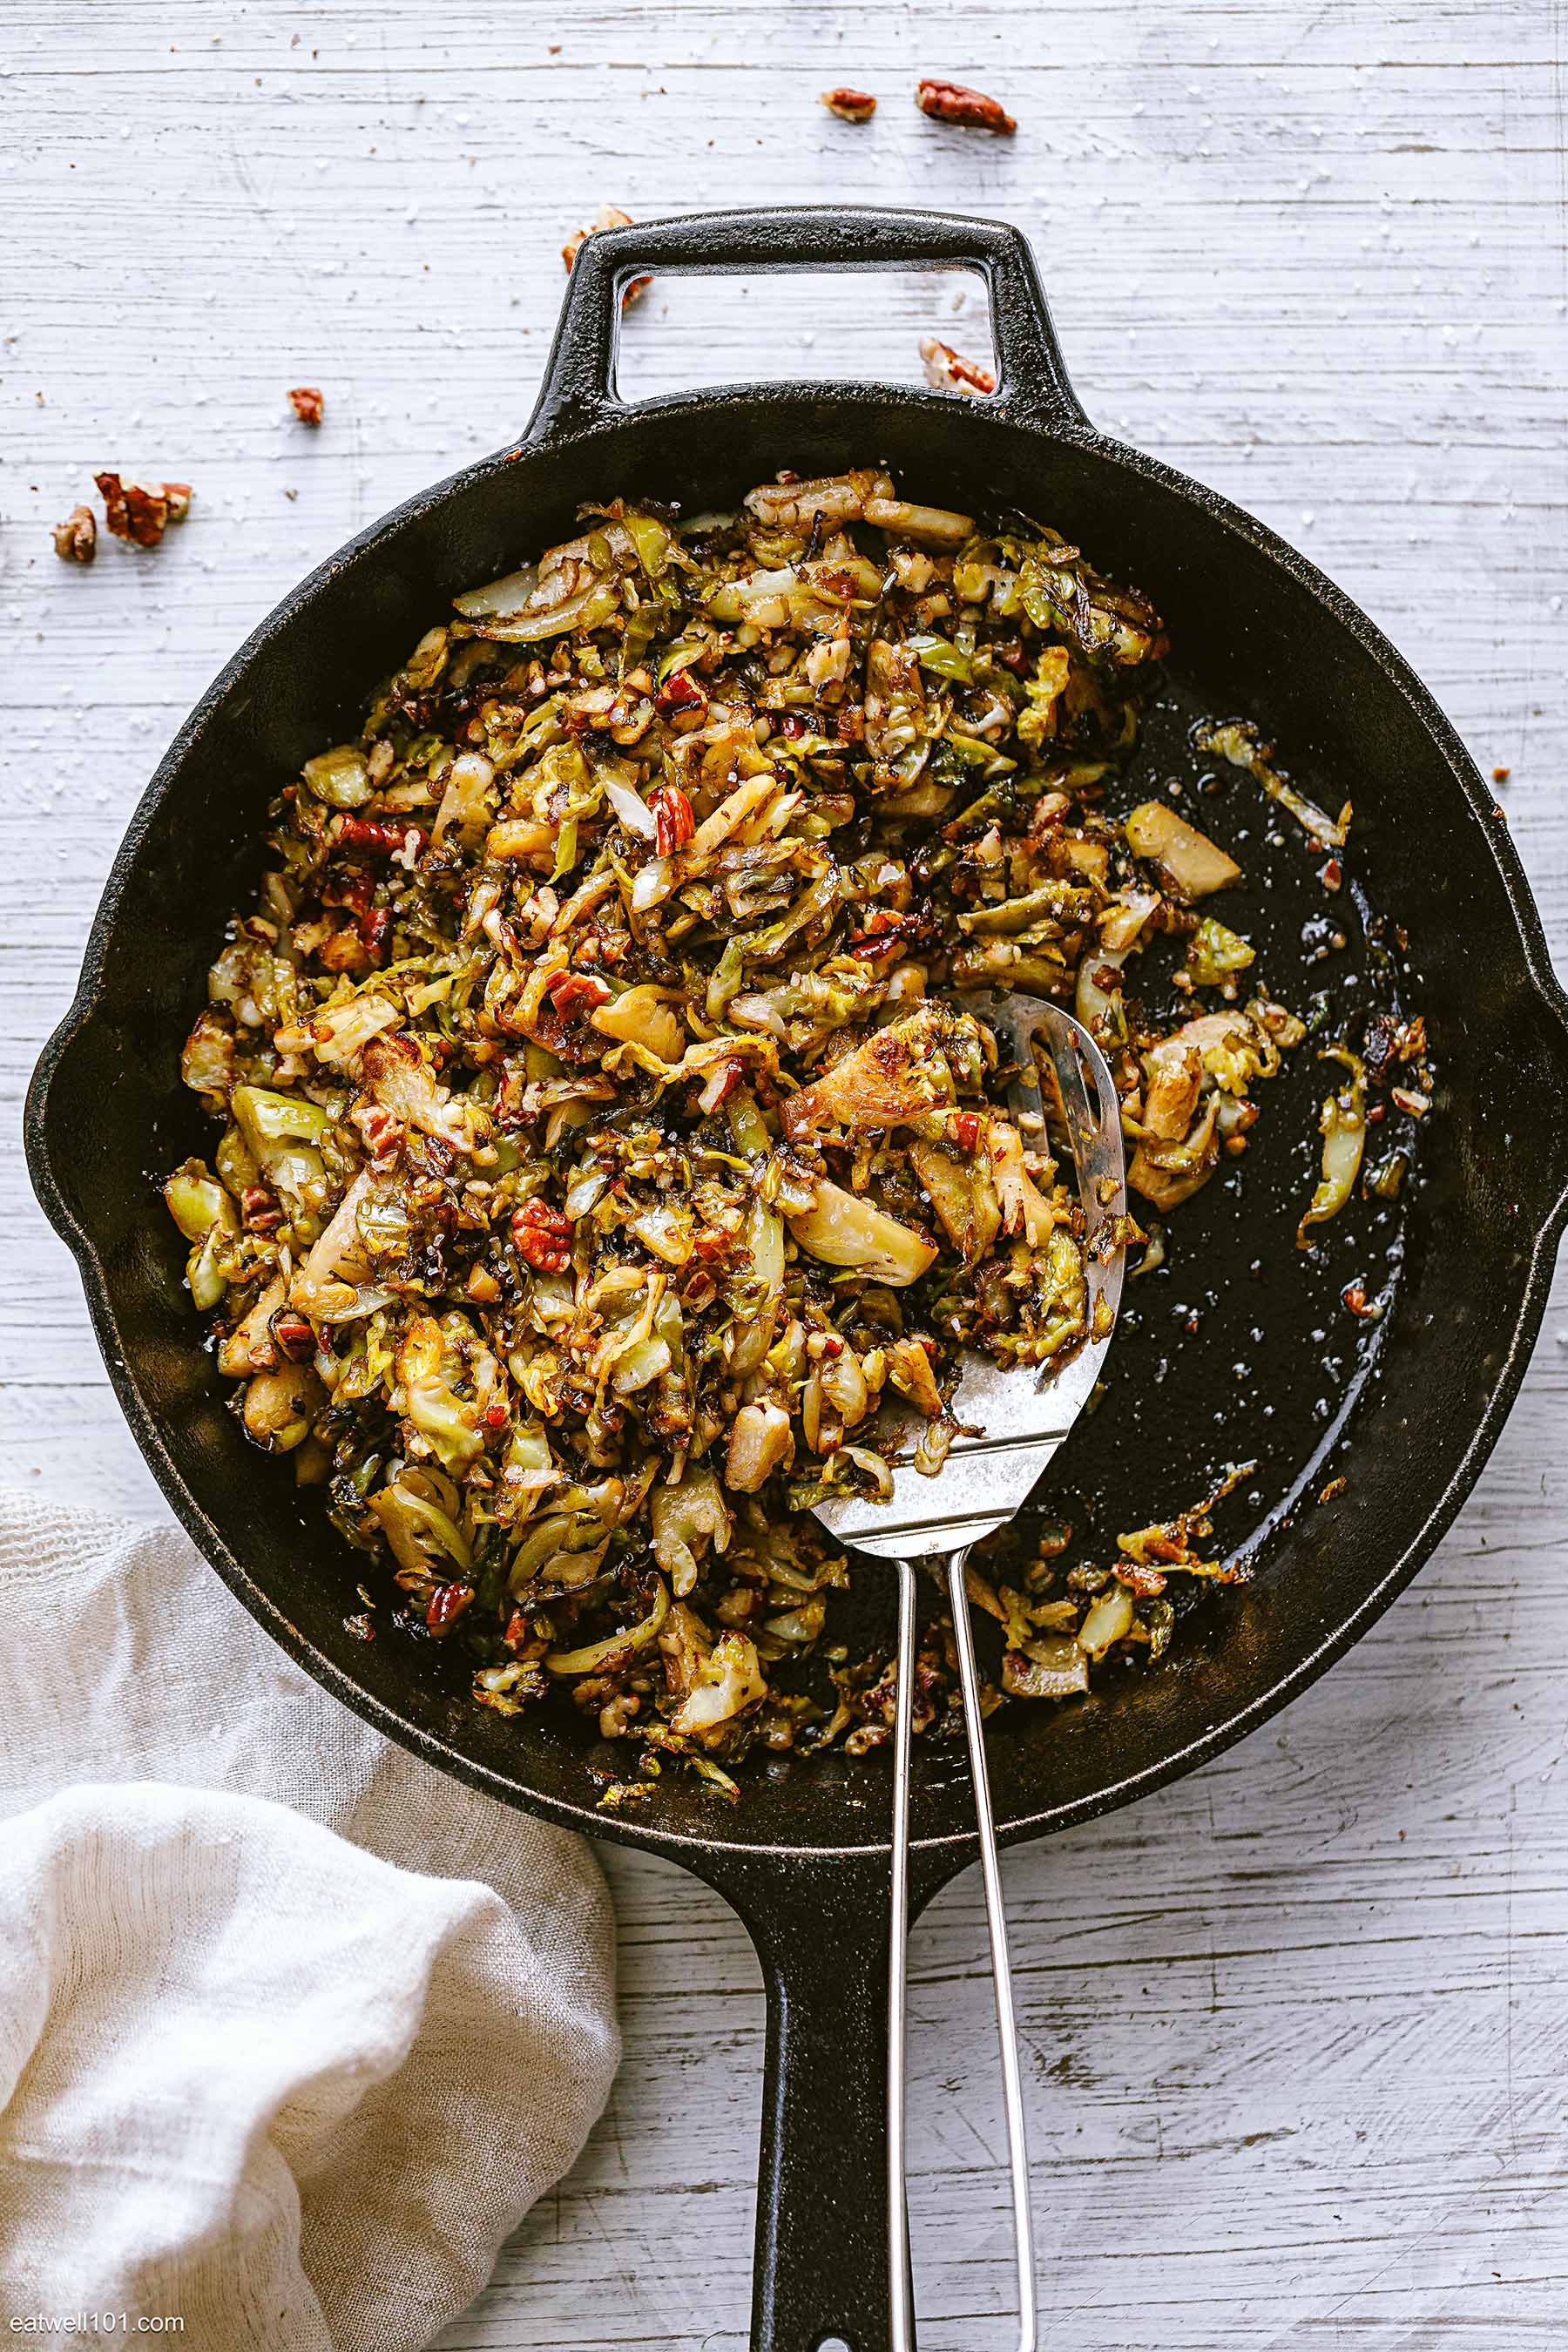 Fried Brussels Sprouts recipe